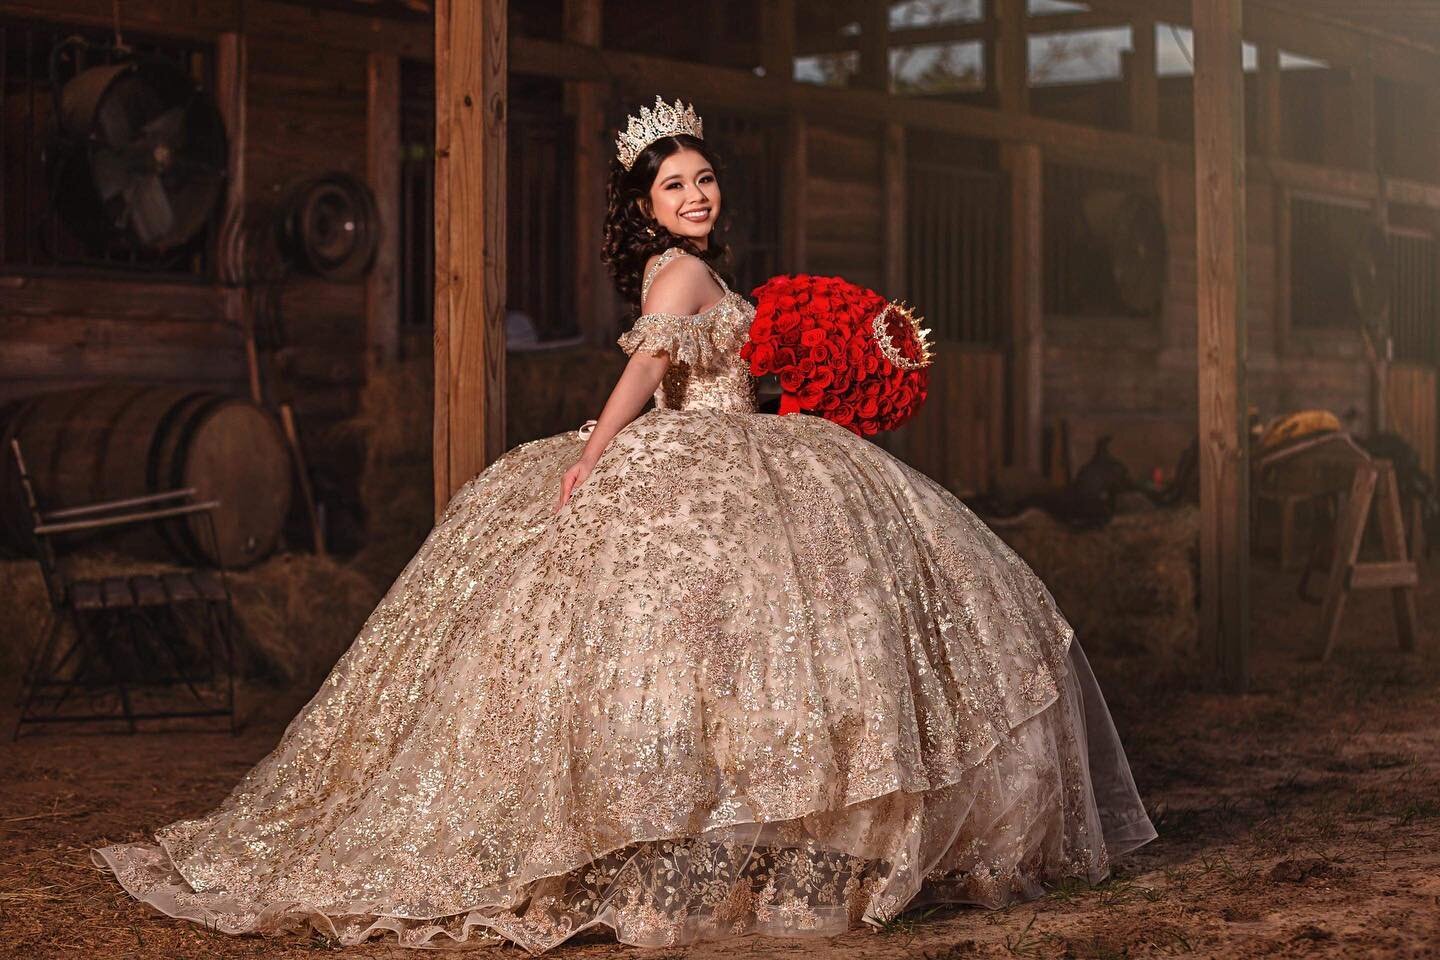 A true princess moment👑 you look absolutely gorgeous! Thank you for trusting us ✨
.
.
.
.
.
#misquince #misxva&ntilde;os #misquincea&ntilde;os #morilee #morileeofficial